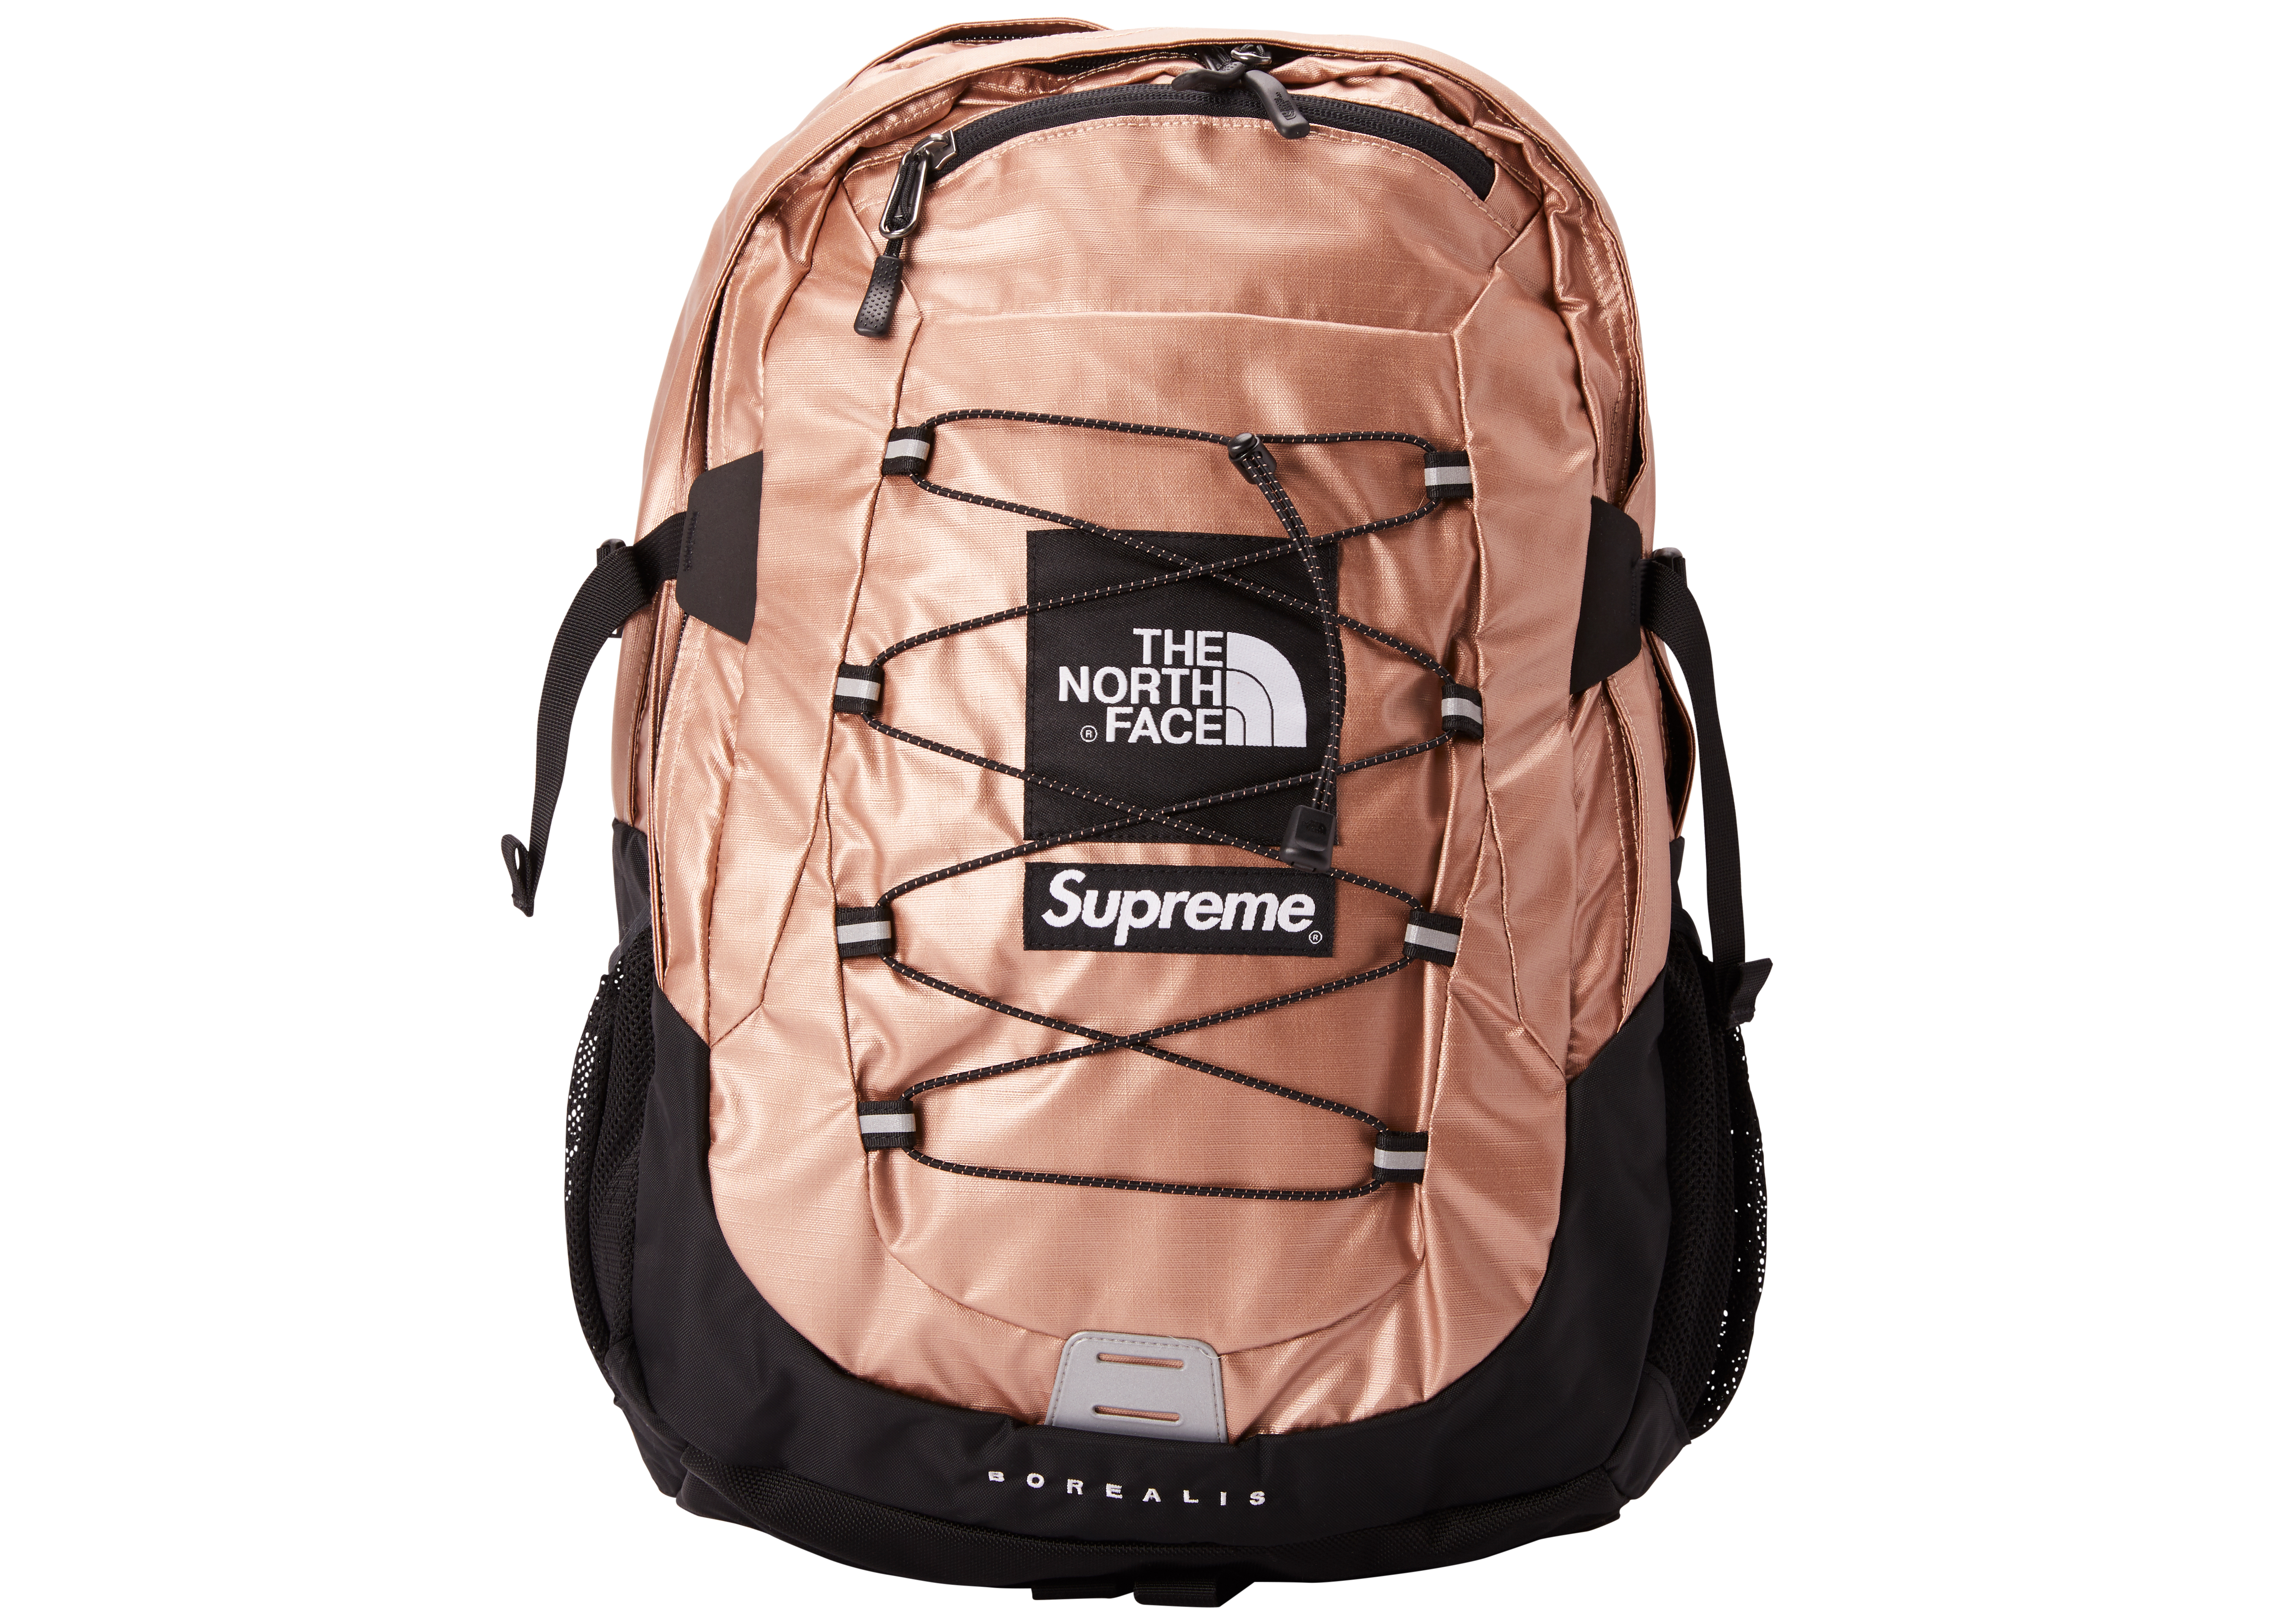 north face backpack sales